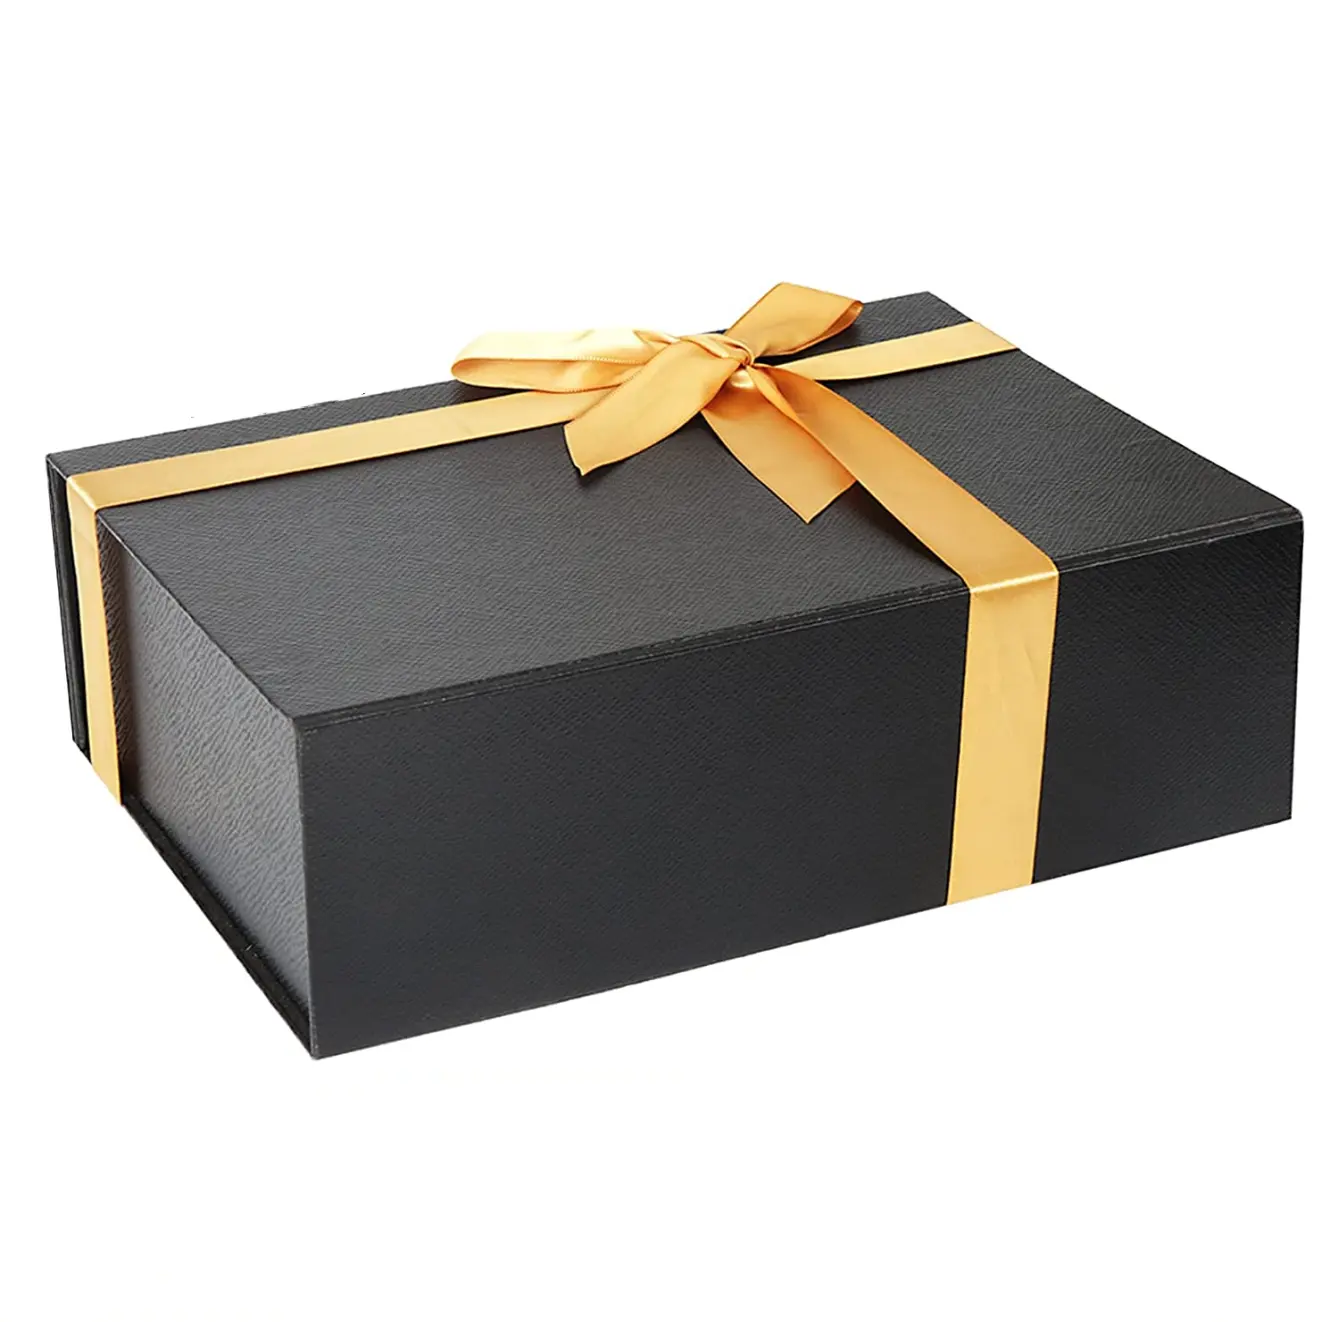 Custom Foldable Gift Box With Lid Black Magnetic Close Decorative Boxes With Gift Card Envelope Wine Packaging Wedding Gift Box